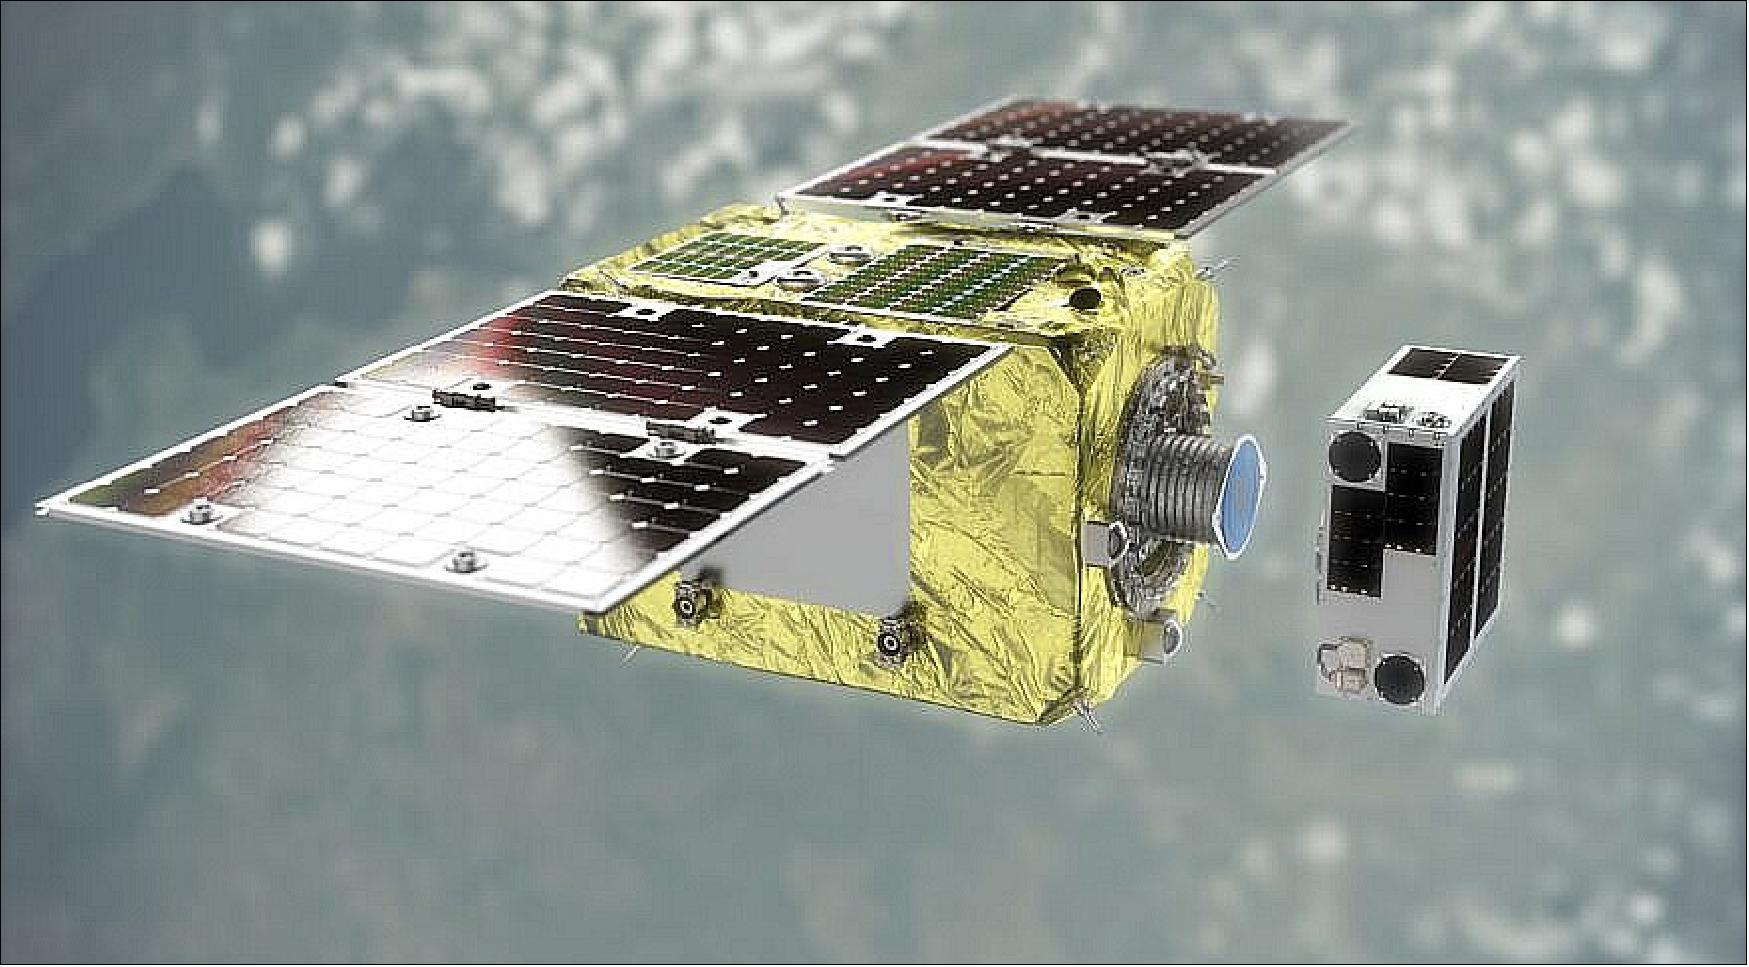 Figure 16: Astroscale released and then recaptured a small client satellite built by SSTL during an Aug. 25 test (image credit: Astroscale)